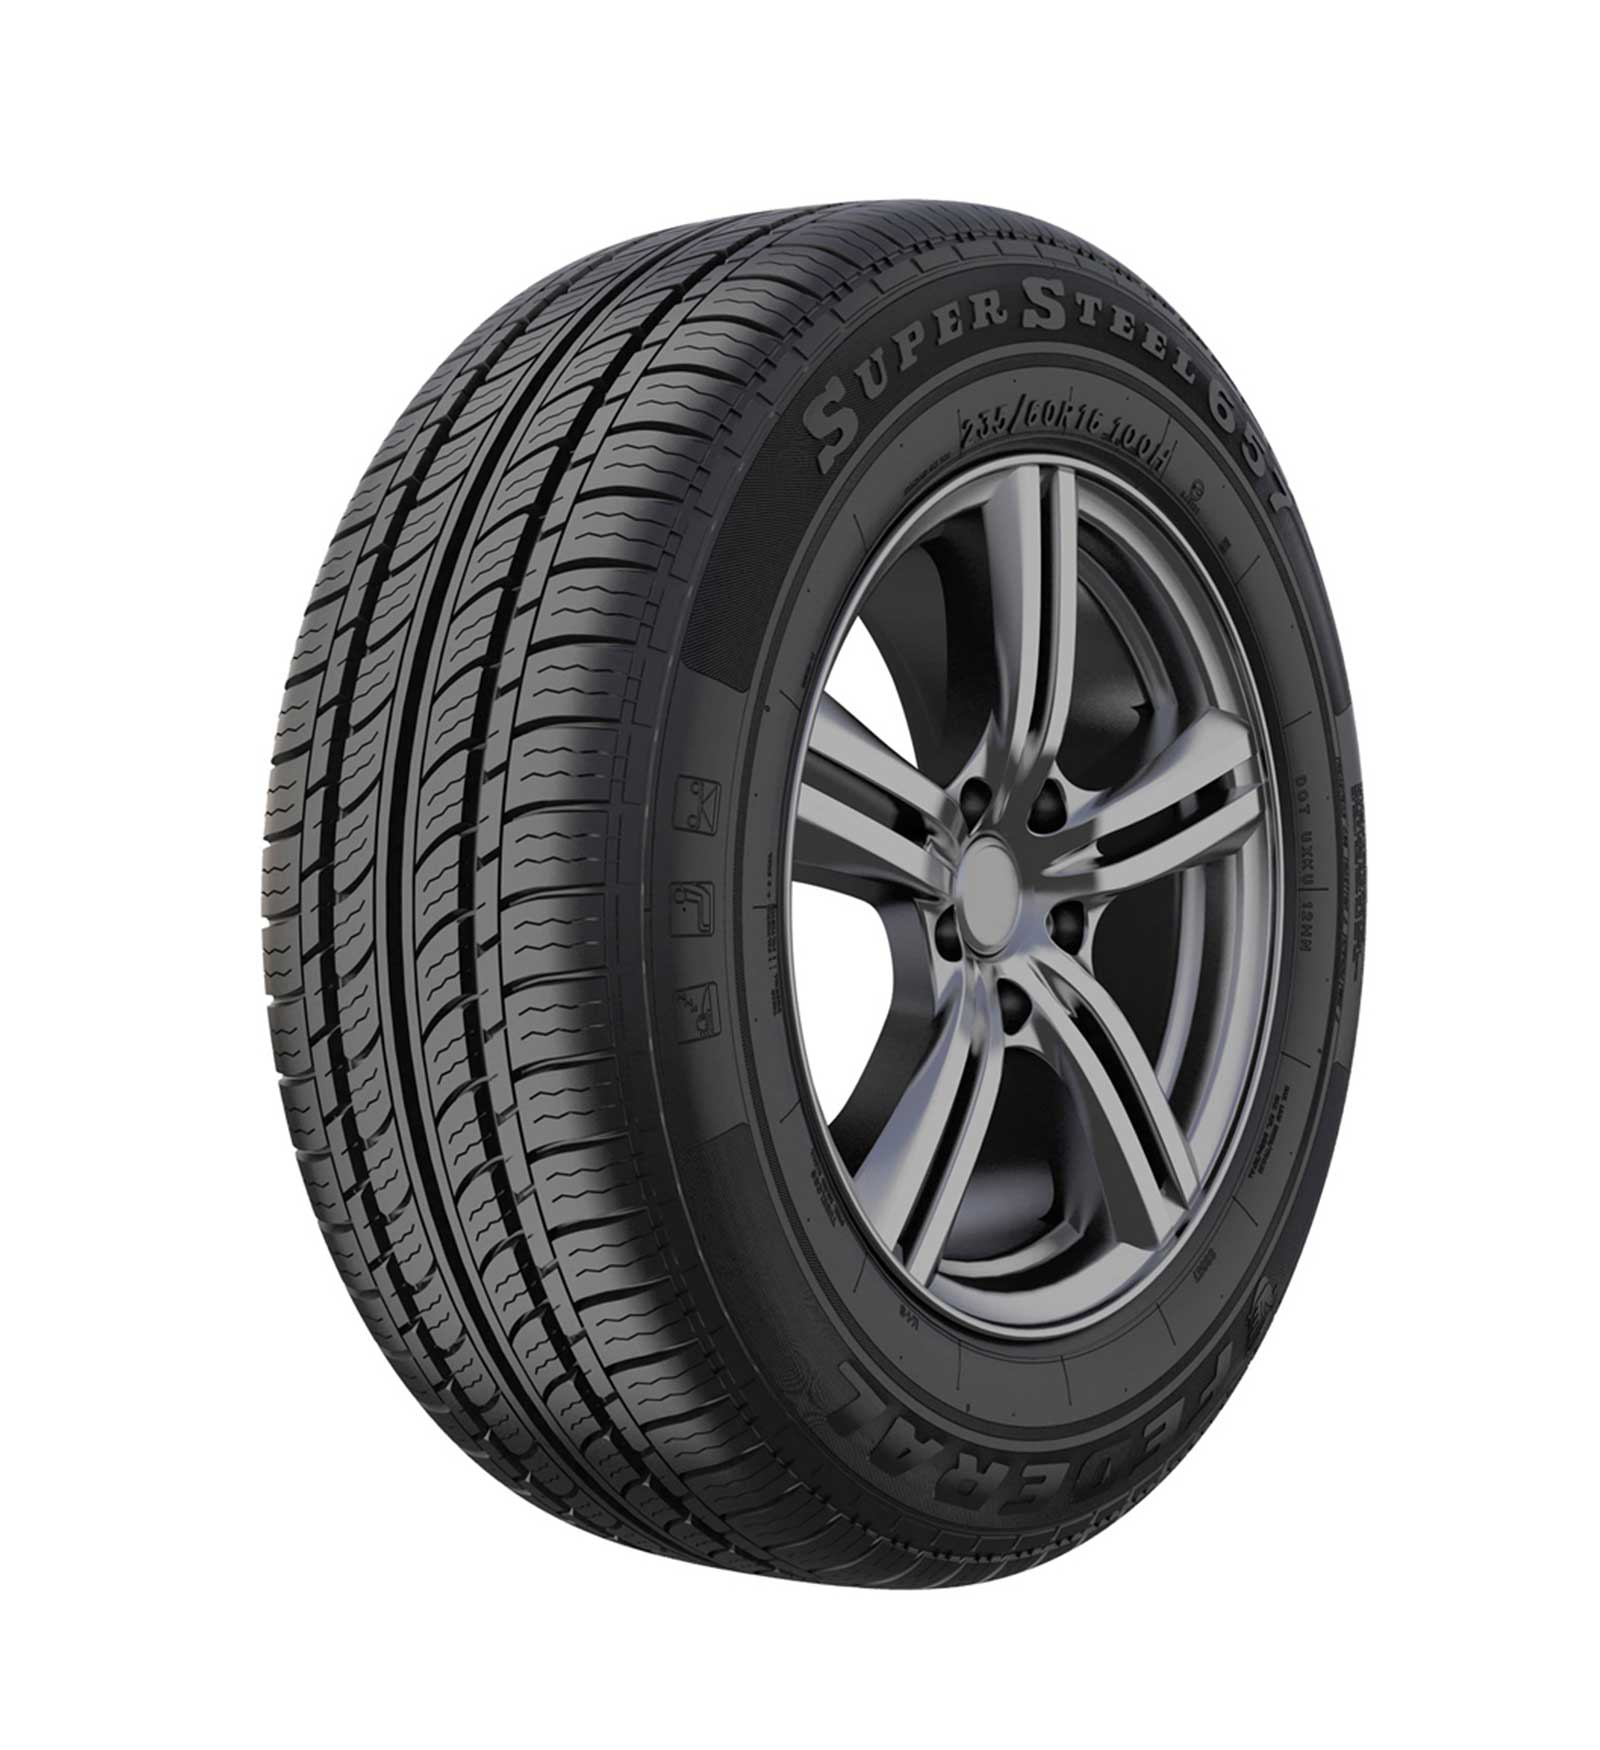 FEDERAL 175/65R14 82T SS657